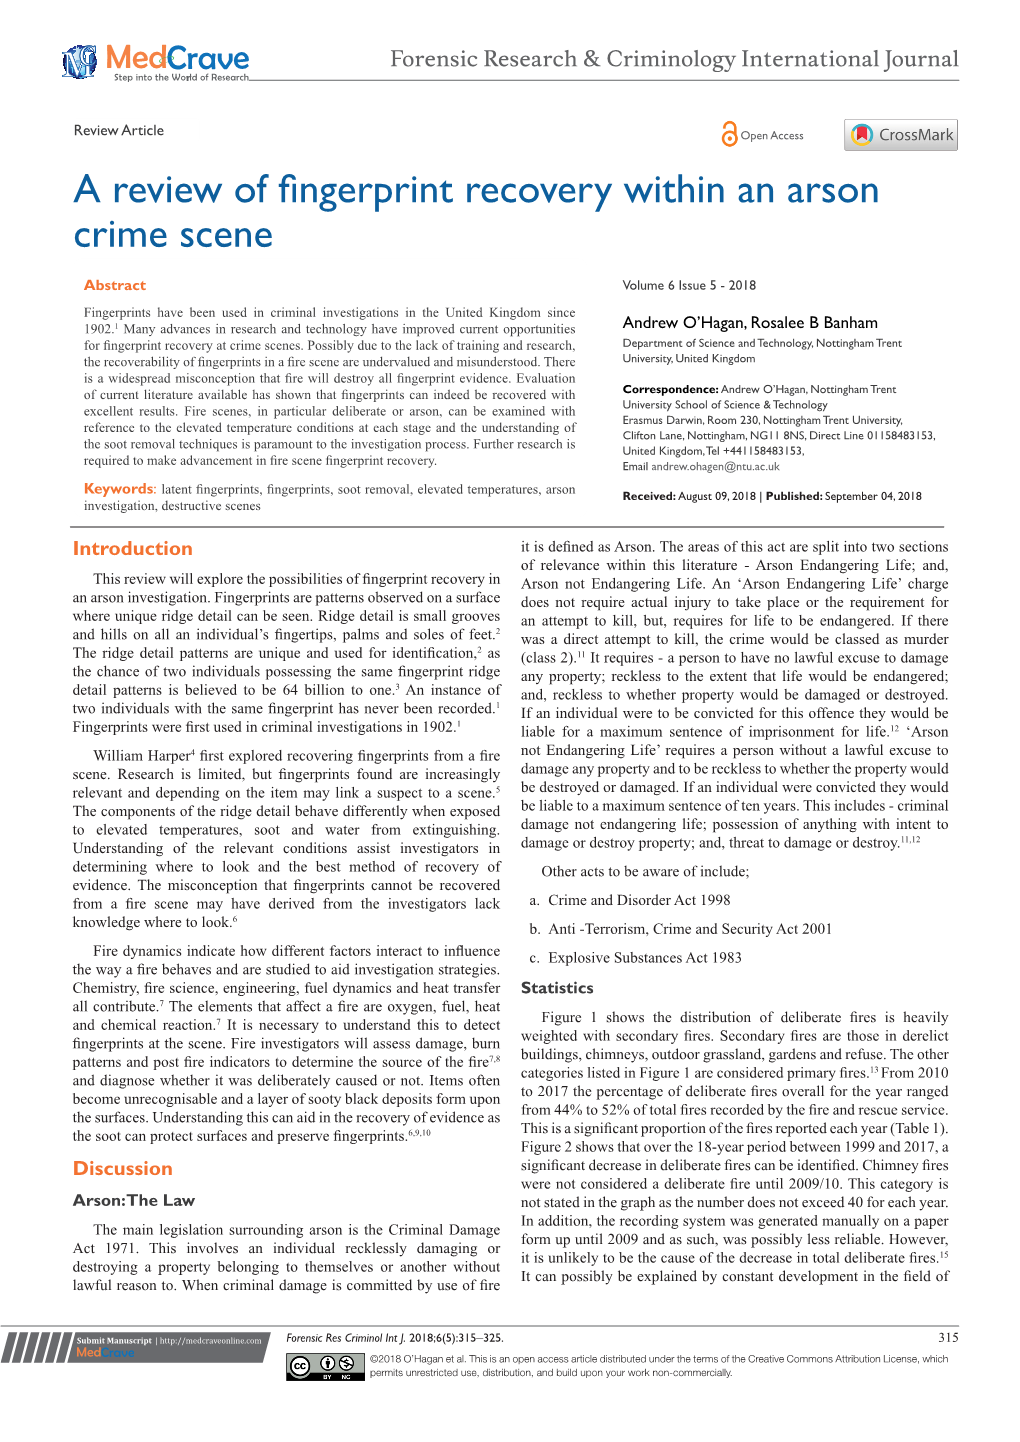 A Review of Fingerprint Recovery Within an Arson Crime Scene